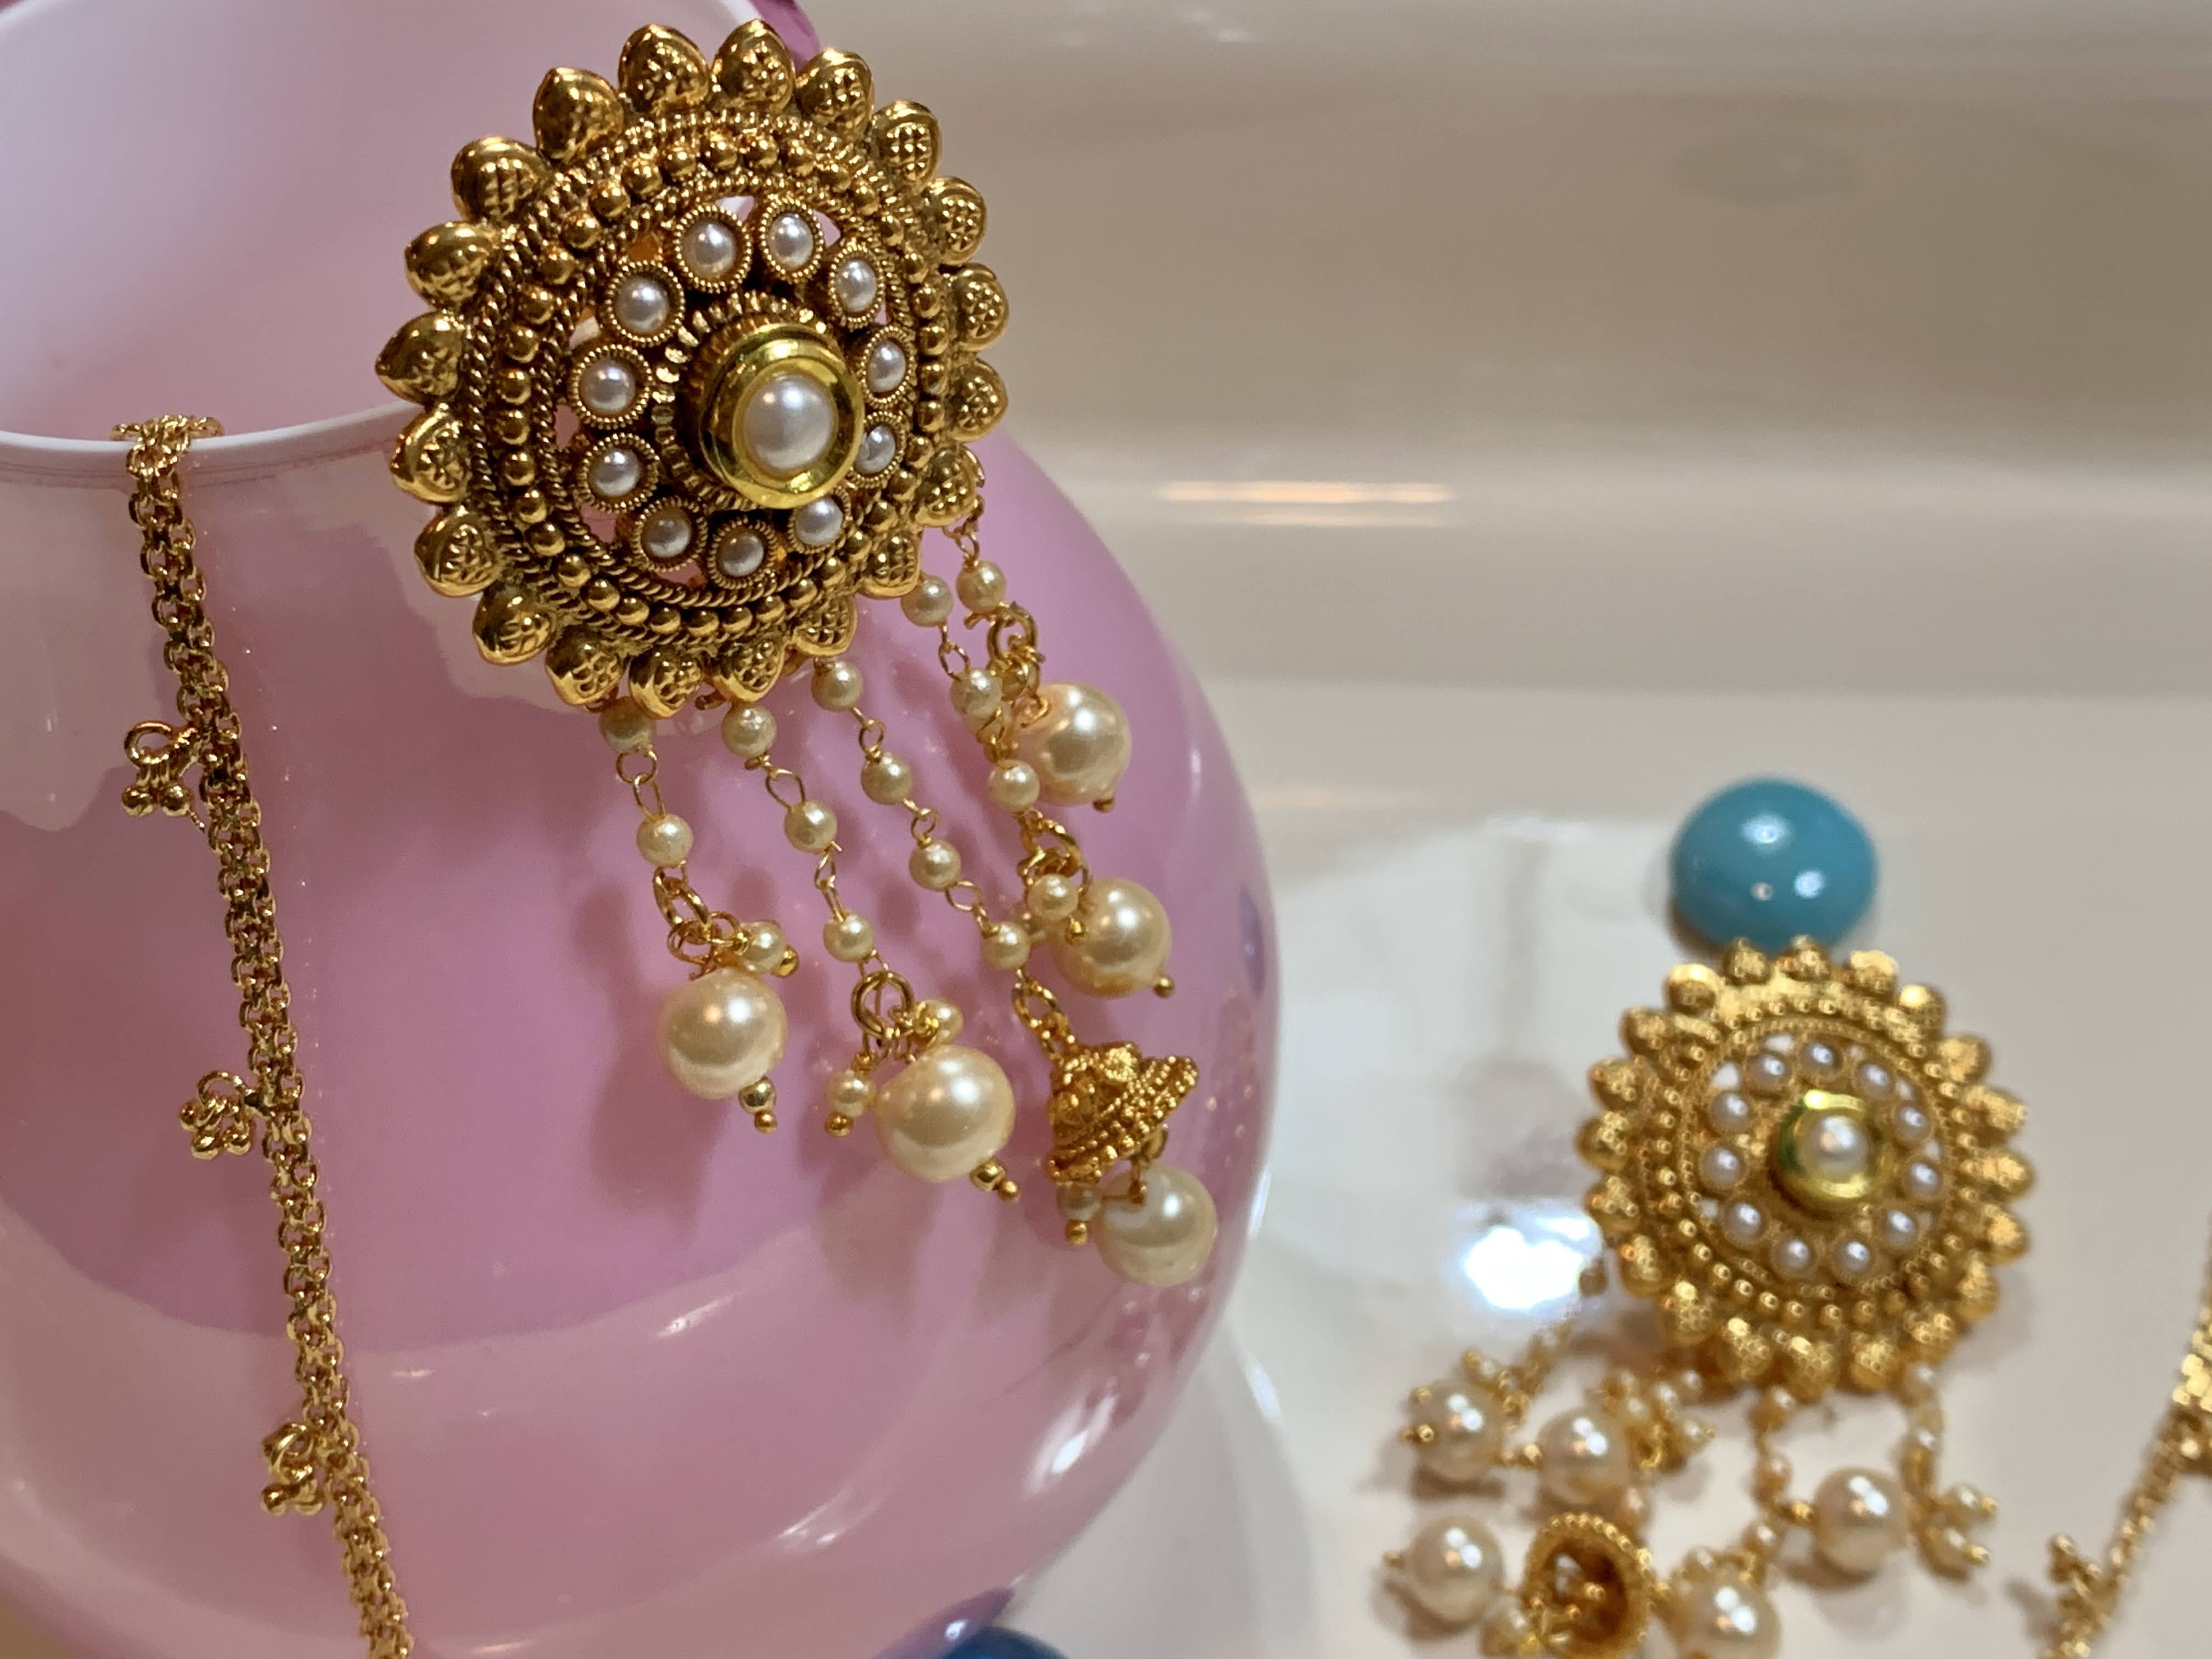 Gold Plated Jhumki Earrings - Temple Jewelry - Pearl Beads Studded